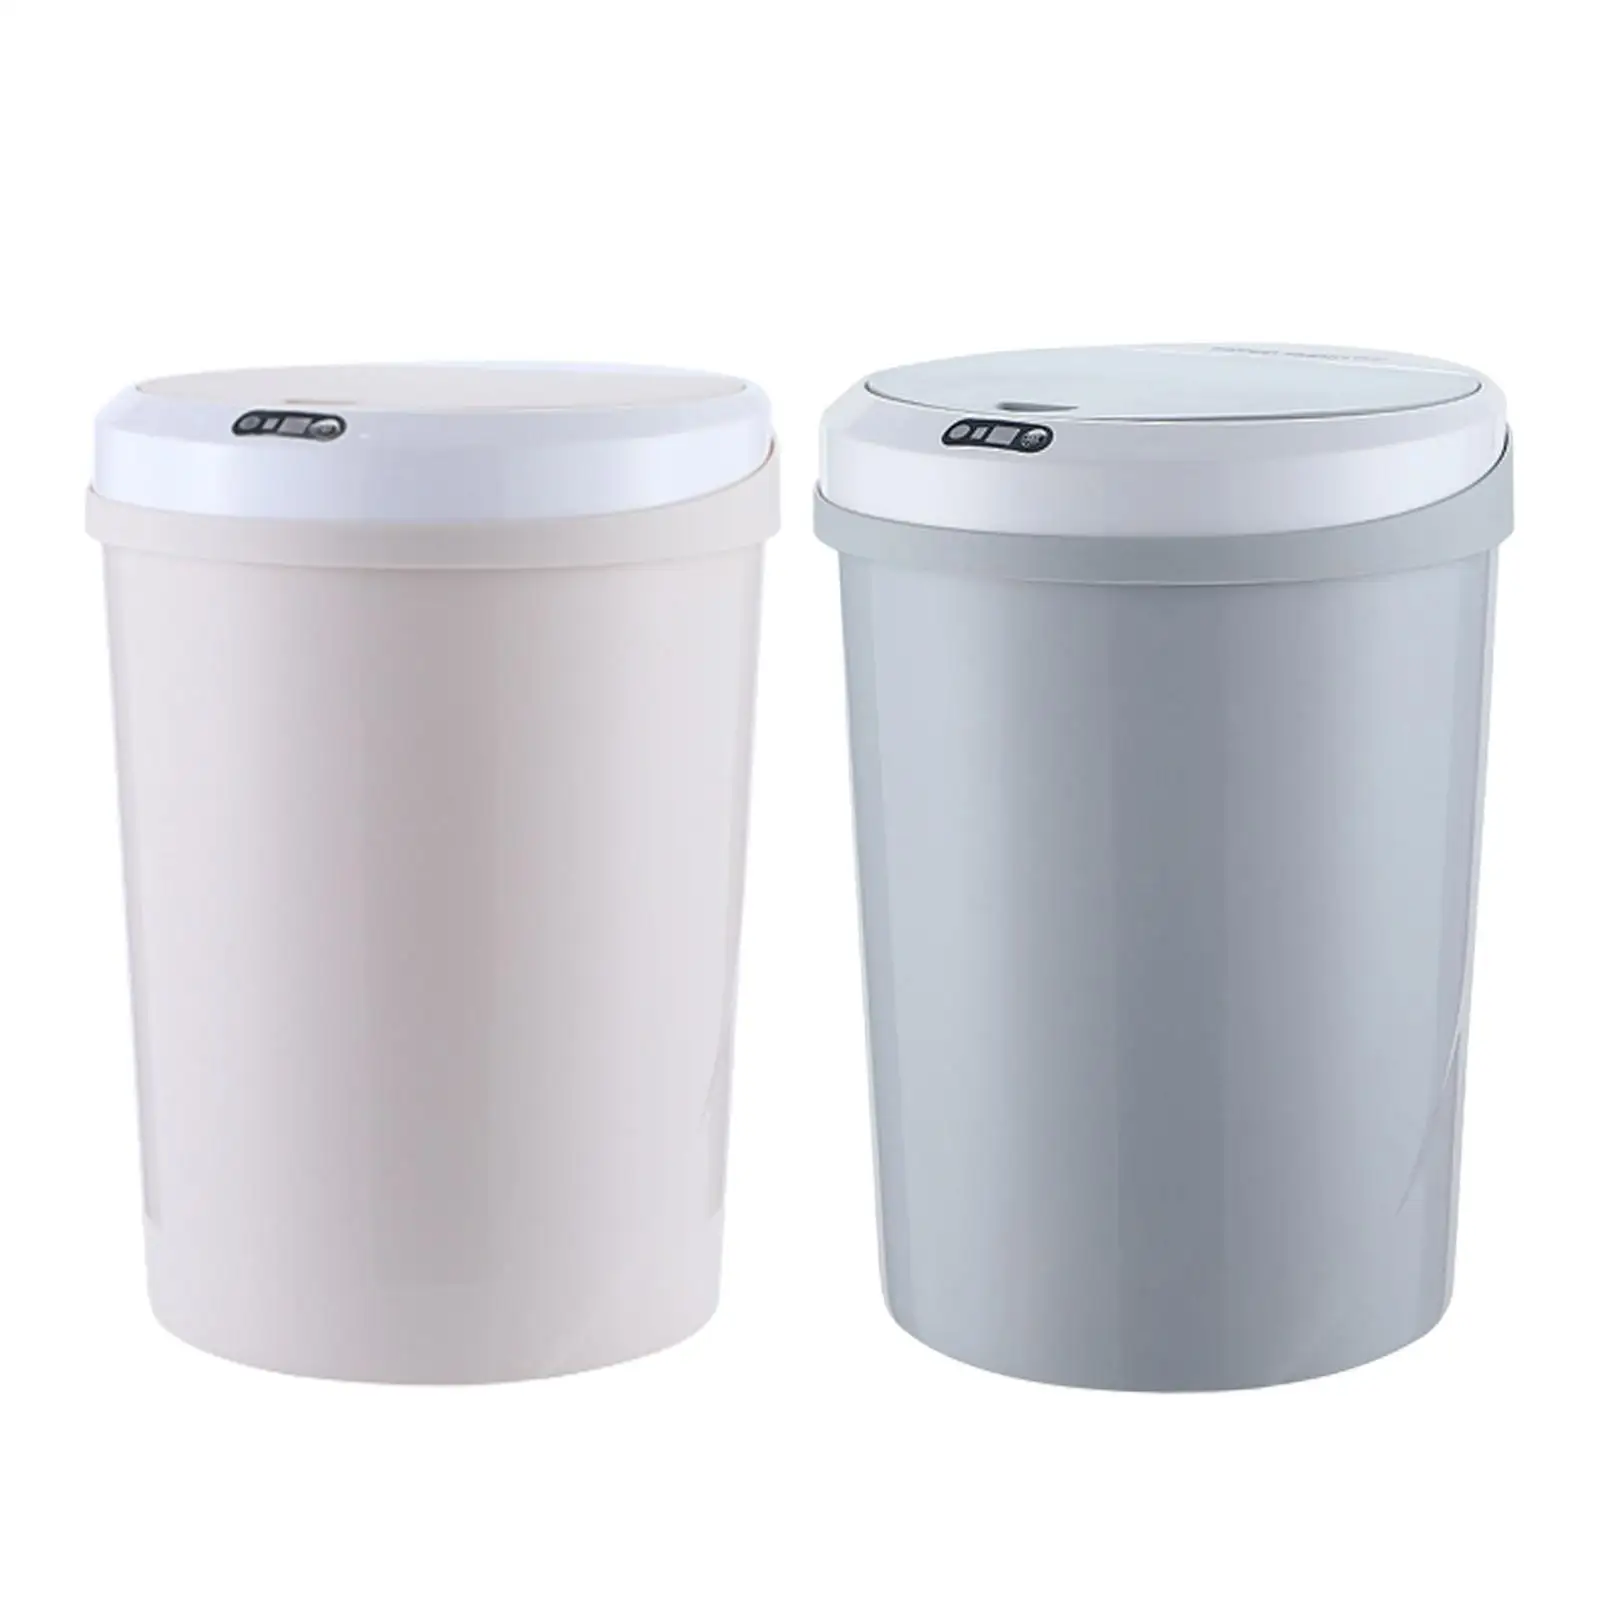 Smart Trash Can Waste Bins Dustbin Wastebasket Garbage Bucket Electric Garbage Can for Office Living Room Home Kitchen Toilet